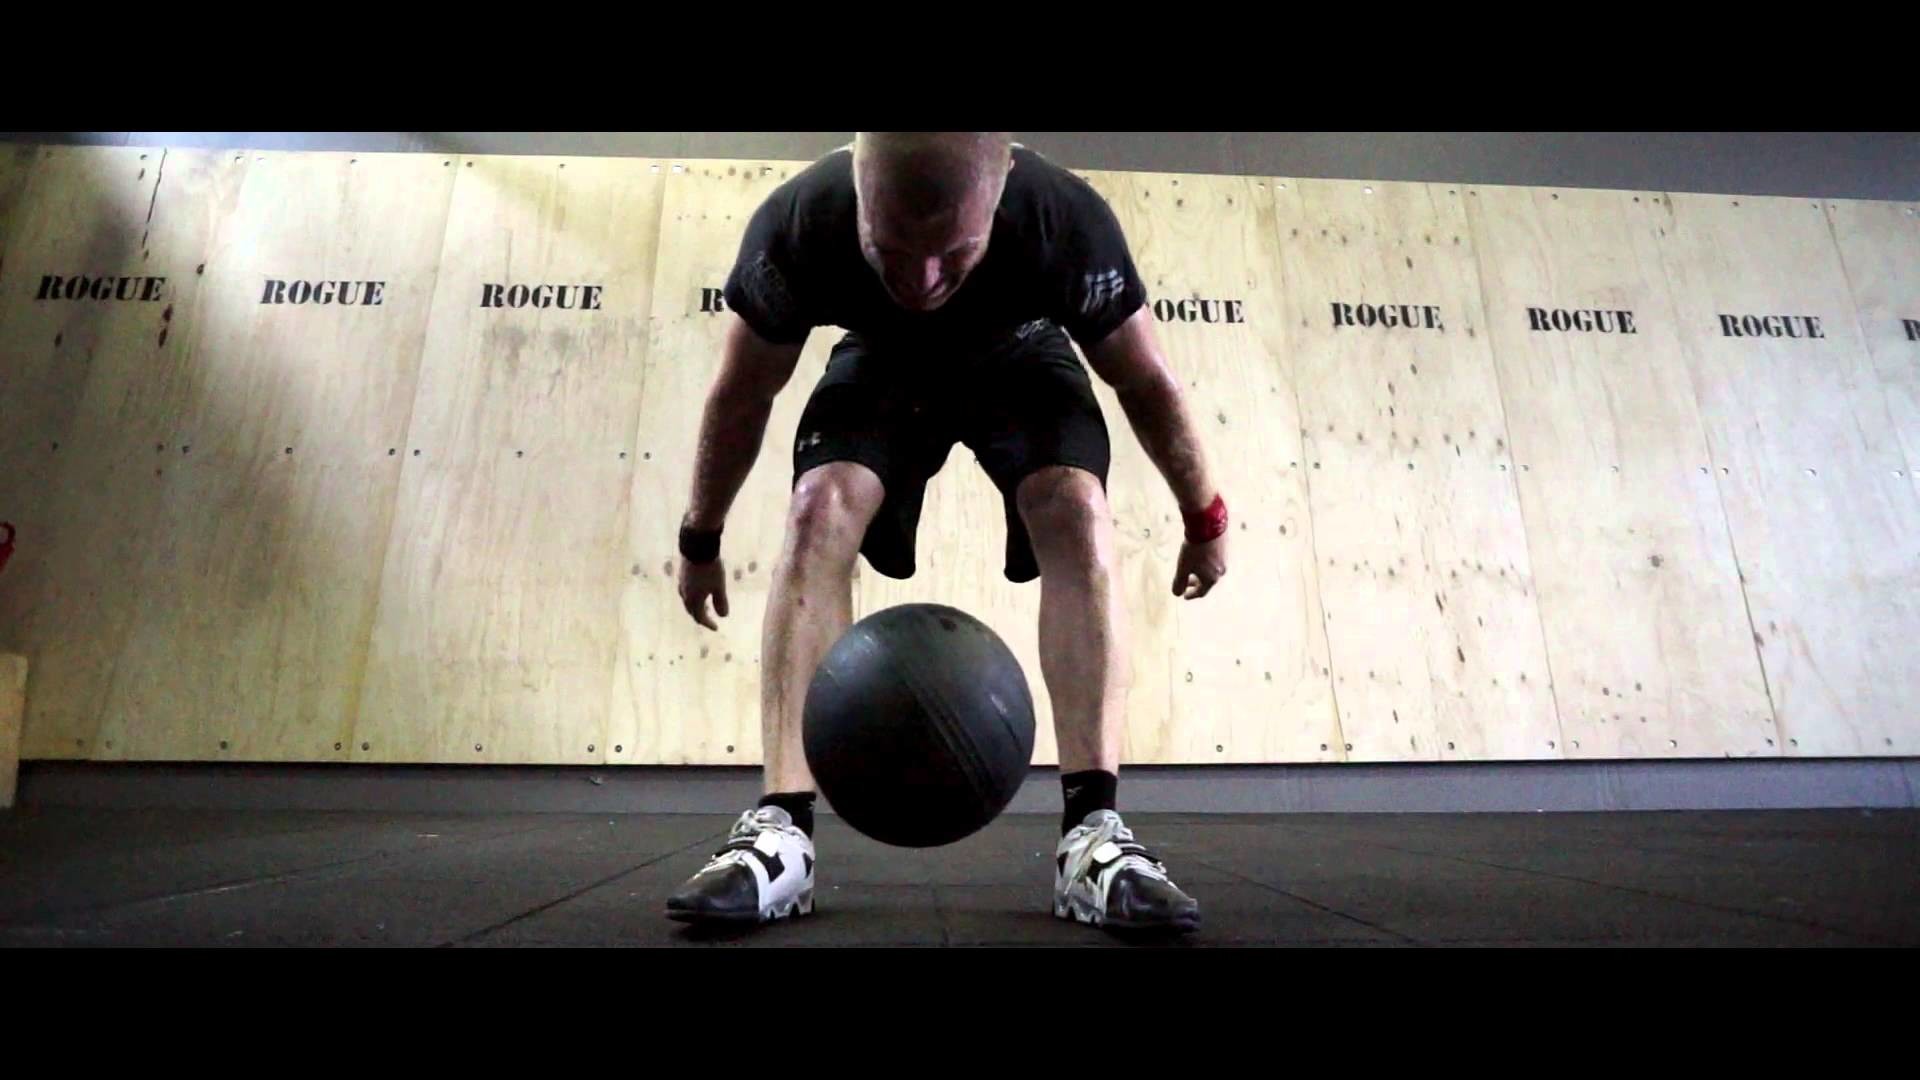 rogue fitness wallpaper,sports,physical fitness,exercise equipment,individual sports,ball